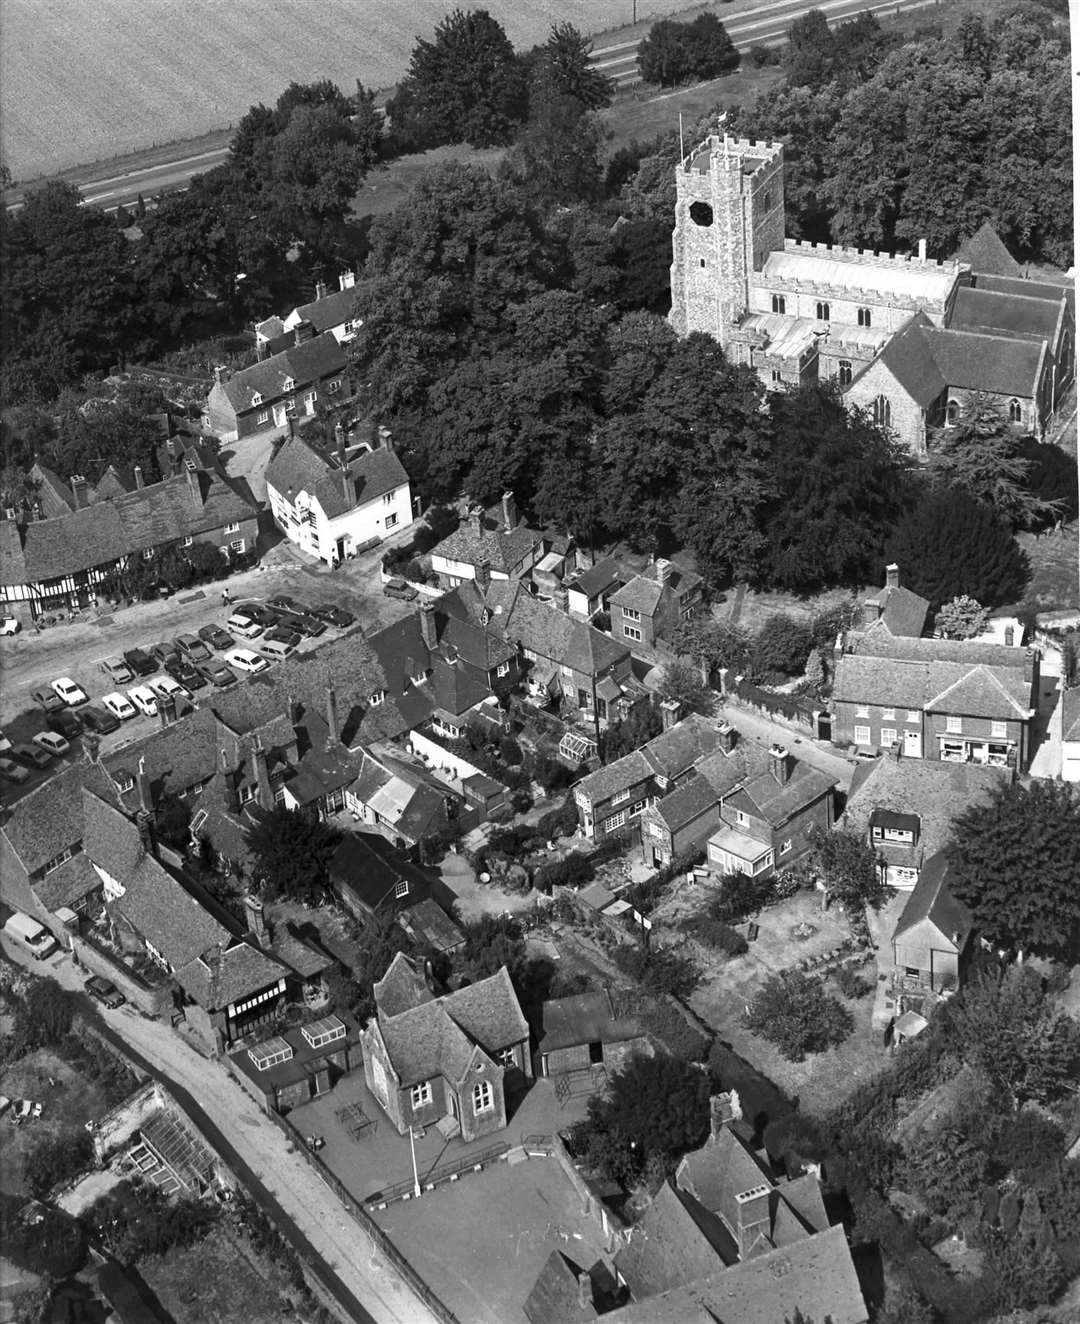 The historic village of Chilham from above in 1976